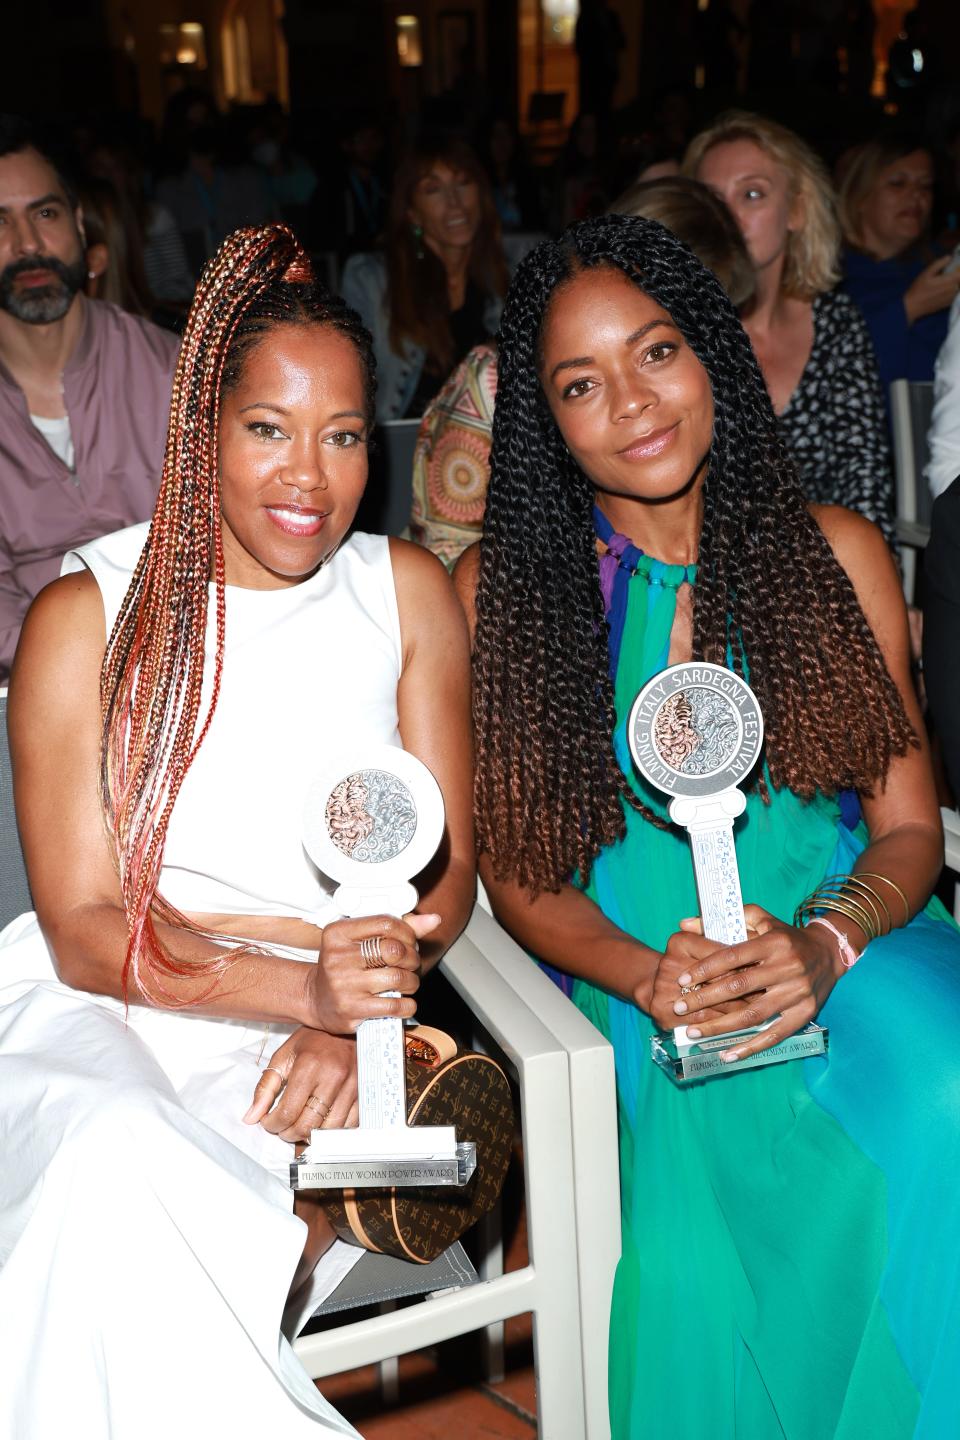 Regina King in a white gown sitting next to Naomie Harris in a turquoise gown holding the Women Power Award